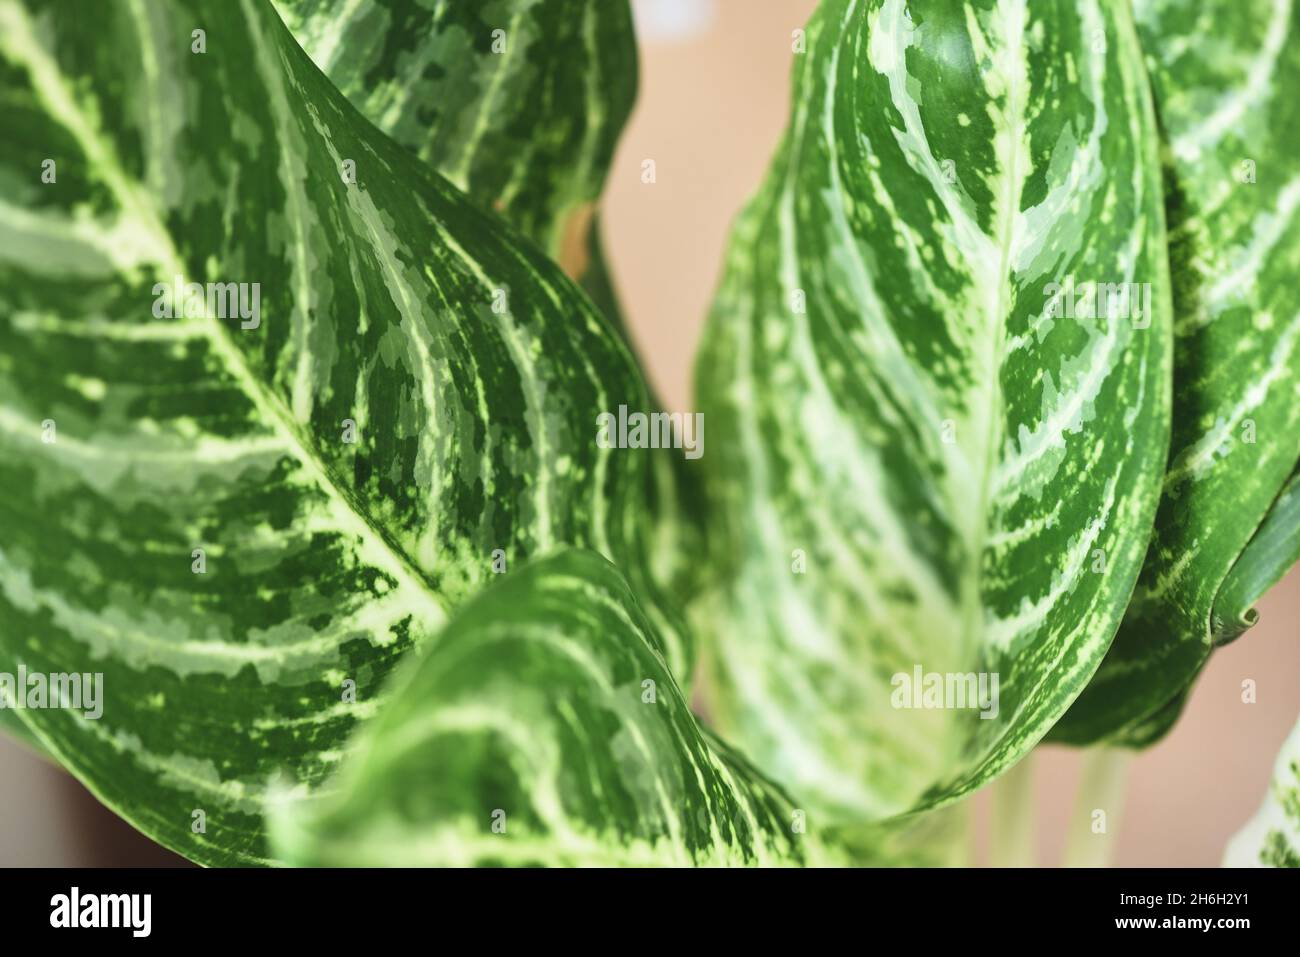 Dieffenbachia flower fresh green and white leaf plant in the home garden ornamental plants in pot, spotted leaves Aglaonema Repotting plant concept Stock Photo